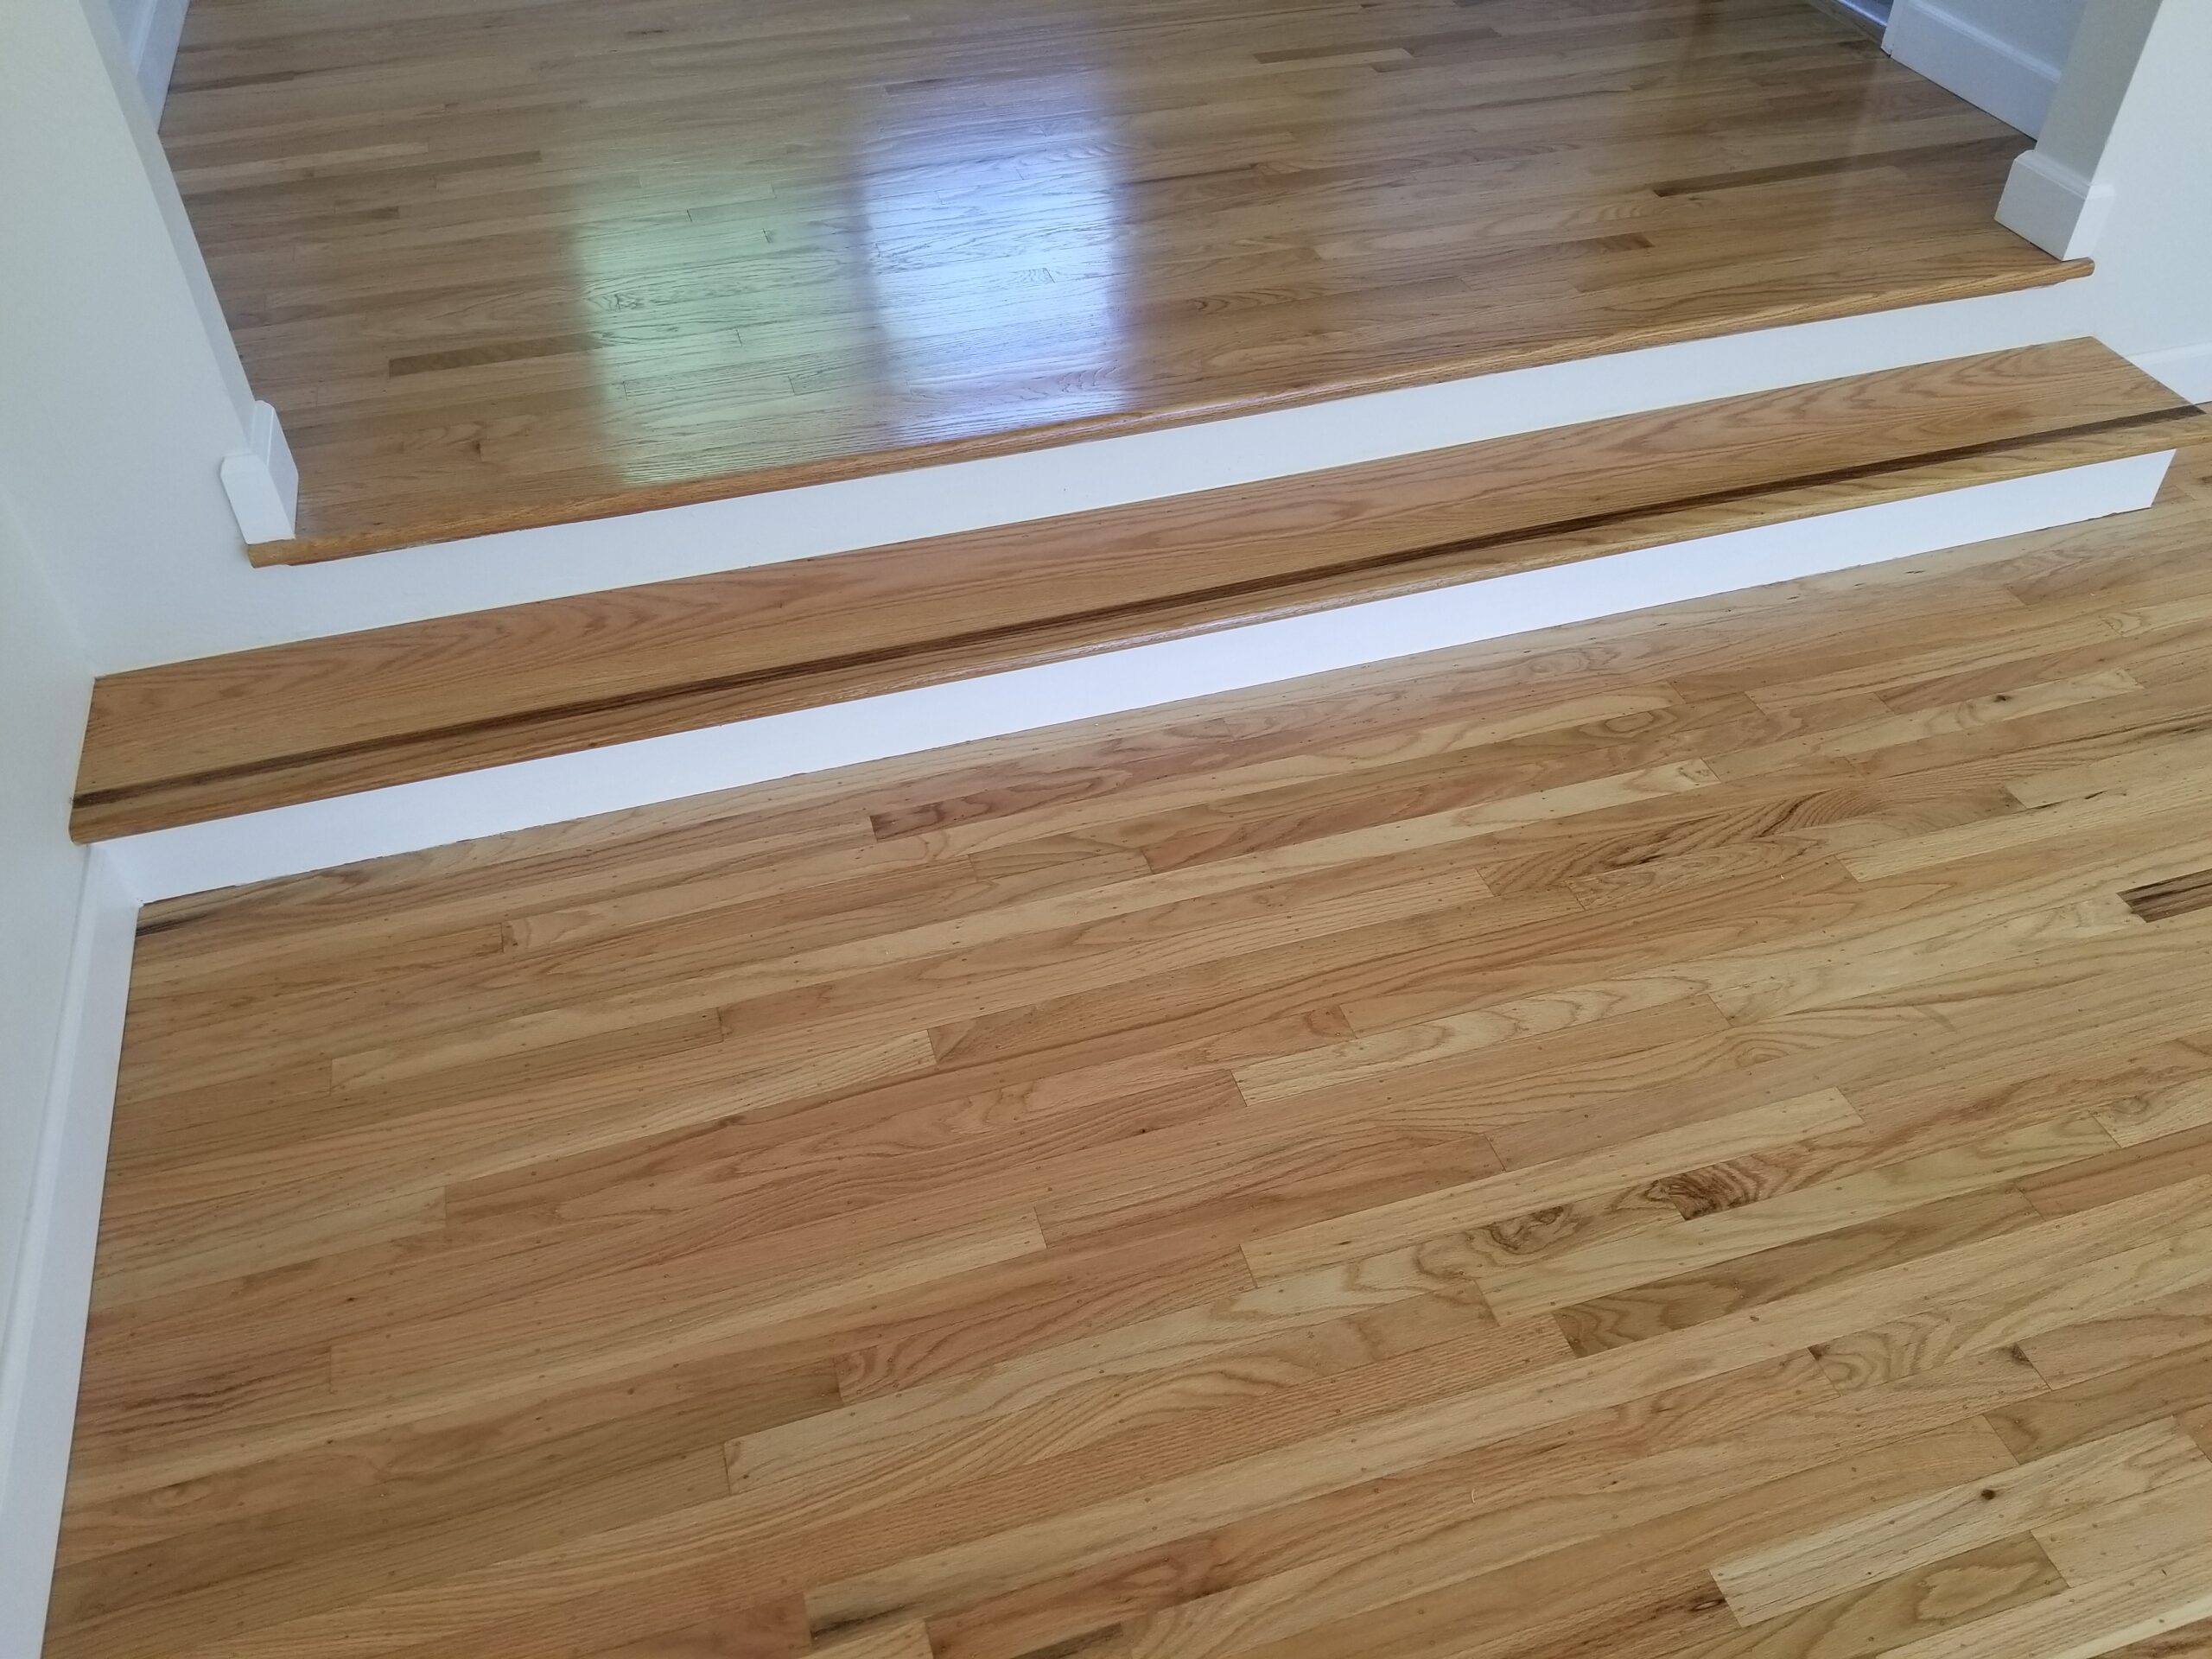 San Jose residential: install beech parquet flooring, with 3 coats of water-base finish, to living room.  